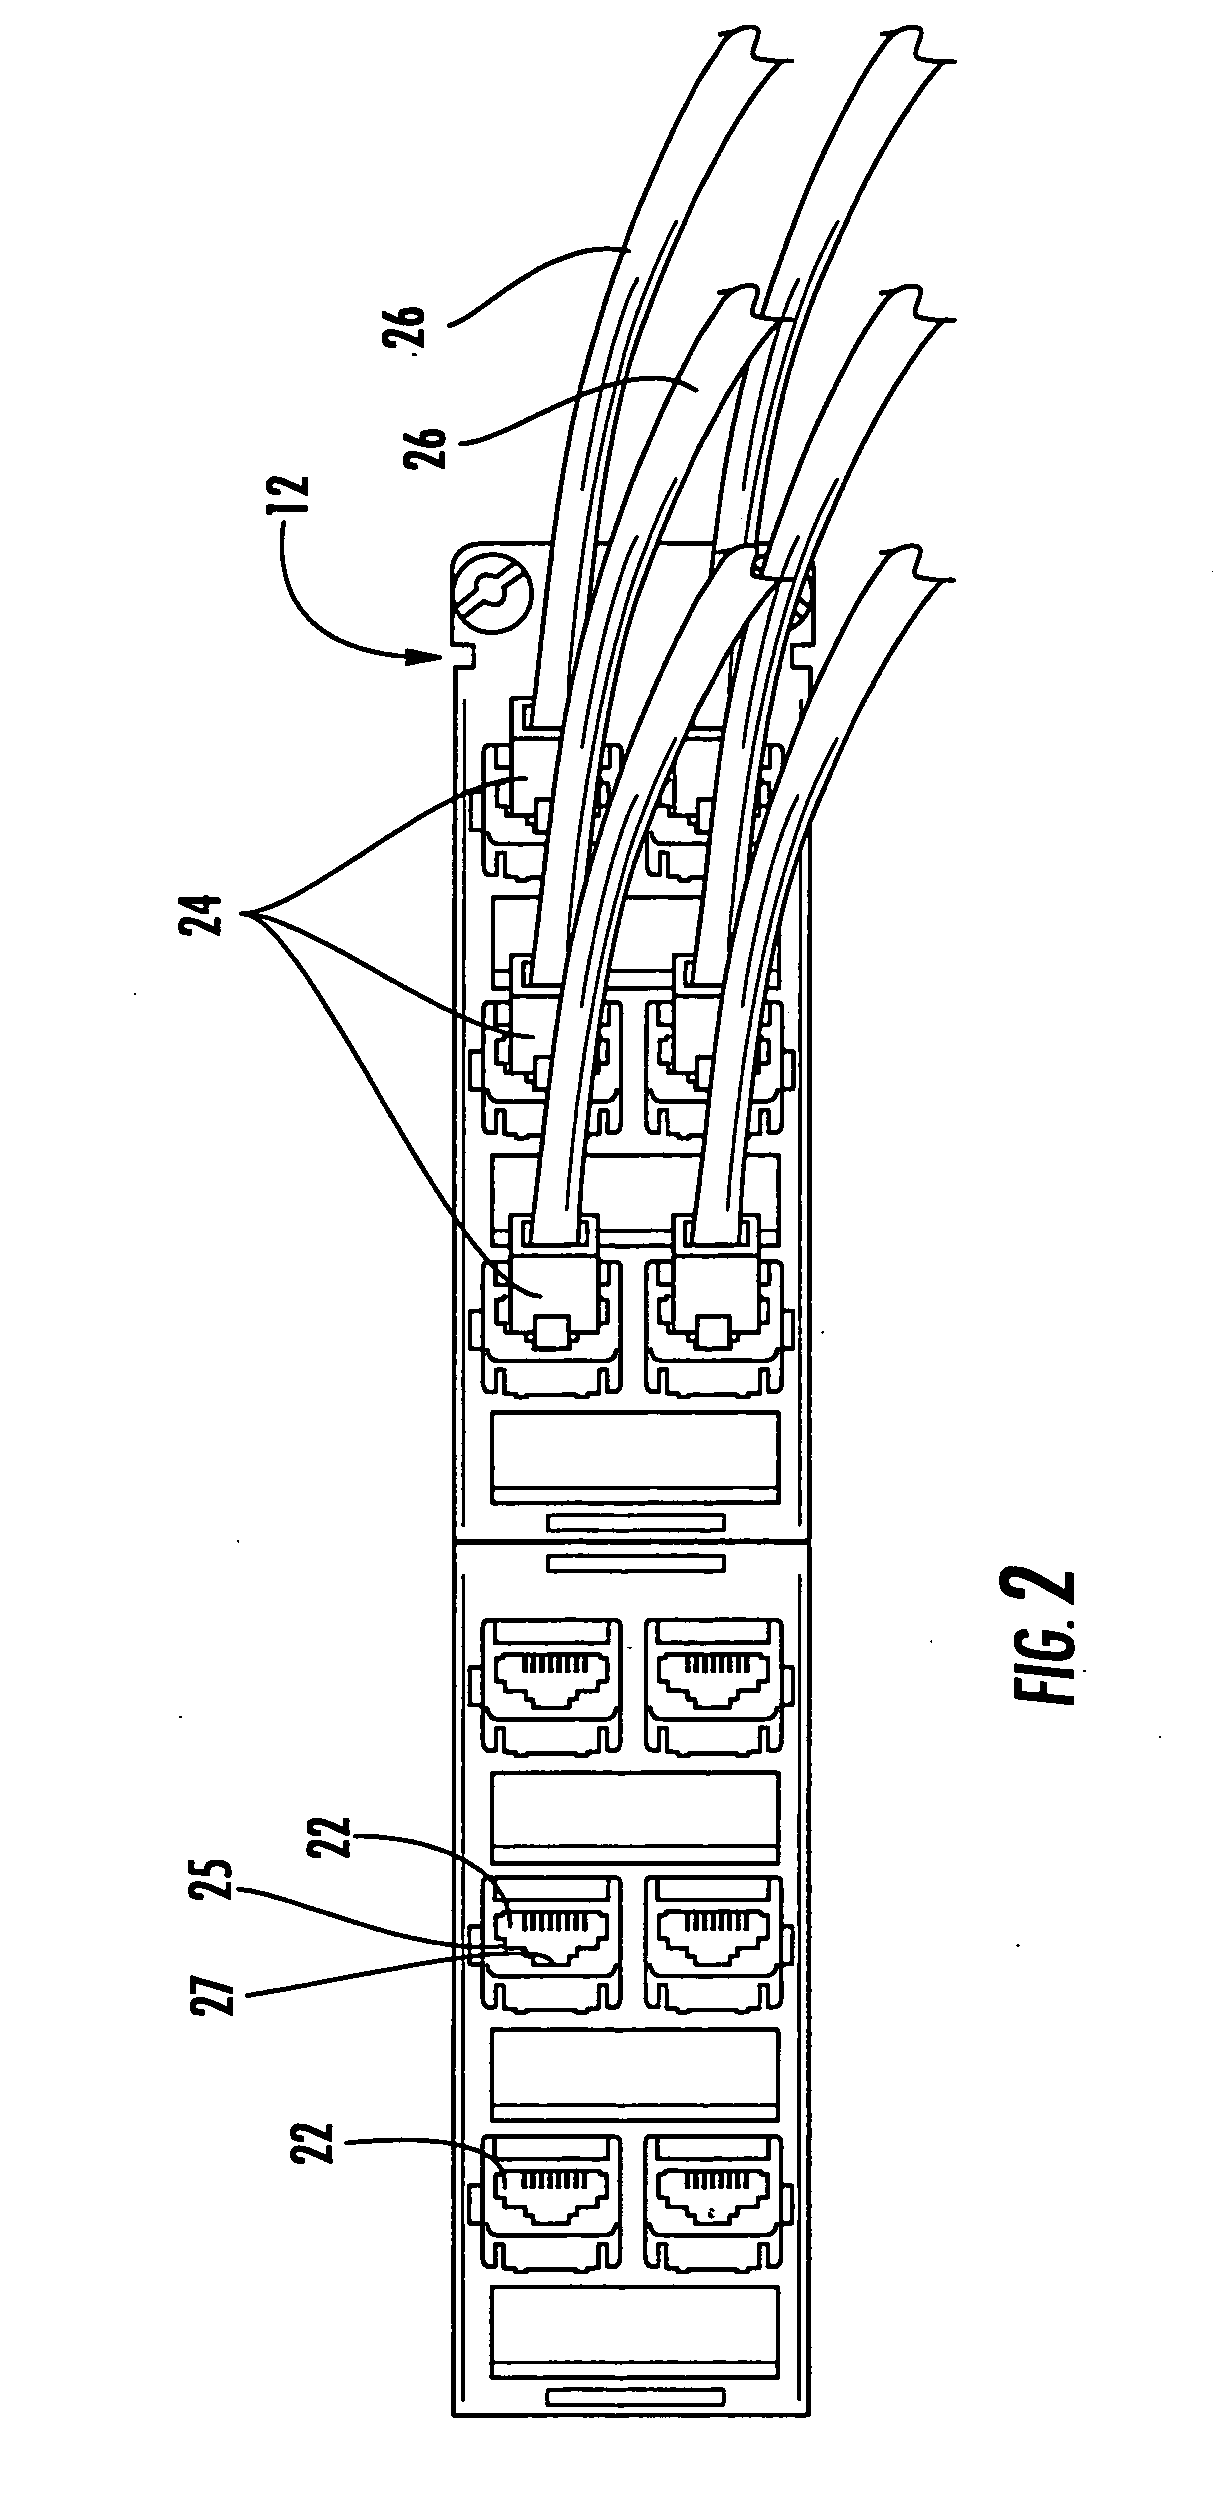 Patch panels with communications connectors that are rotatable about a vertical axis